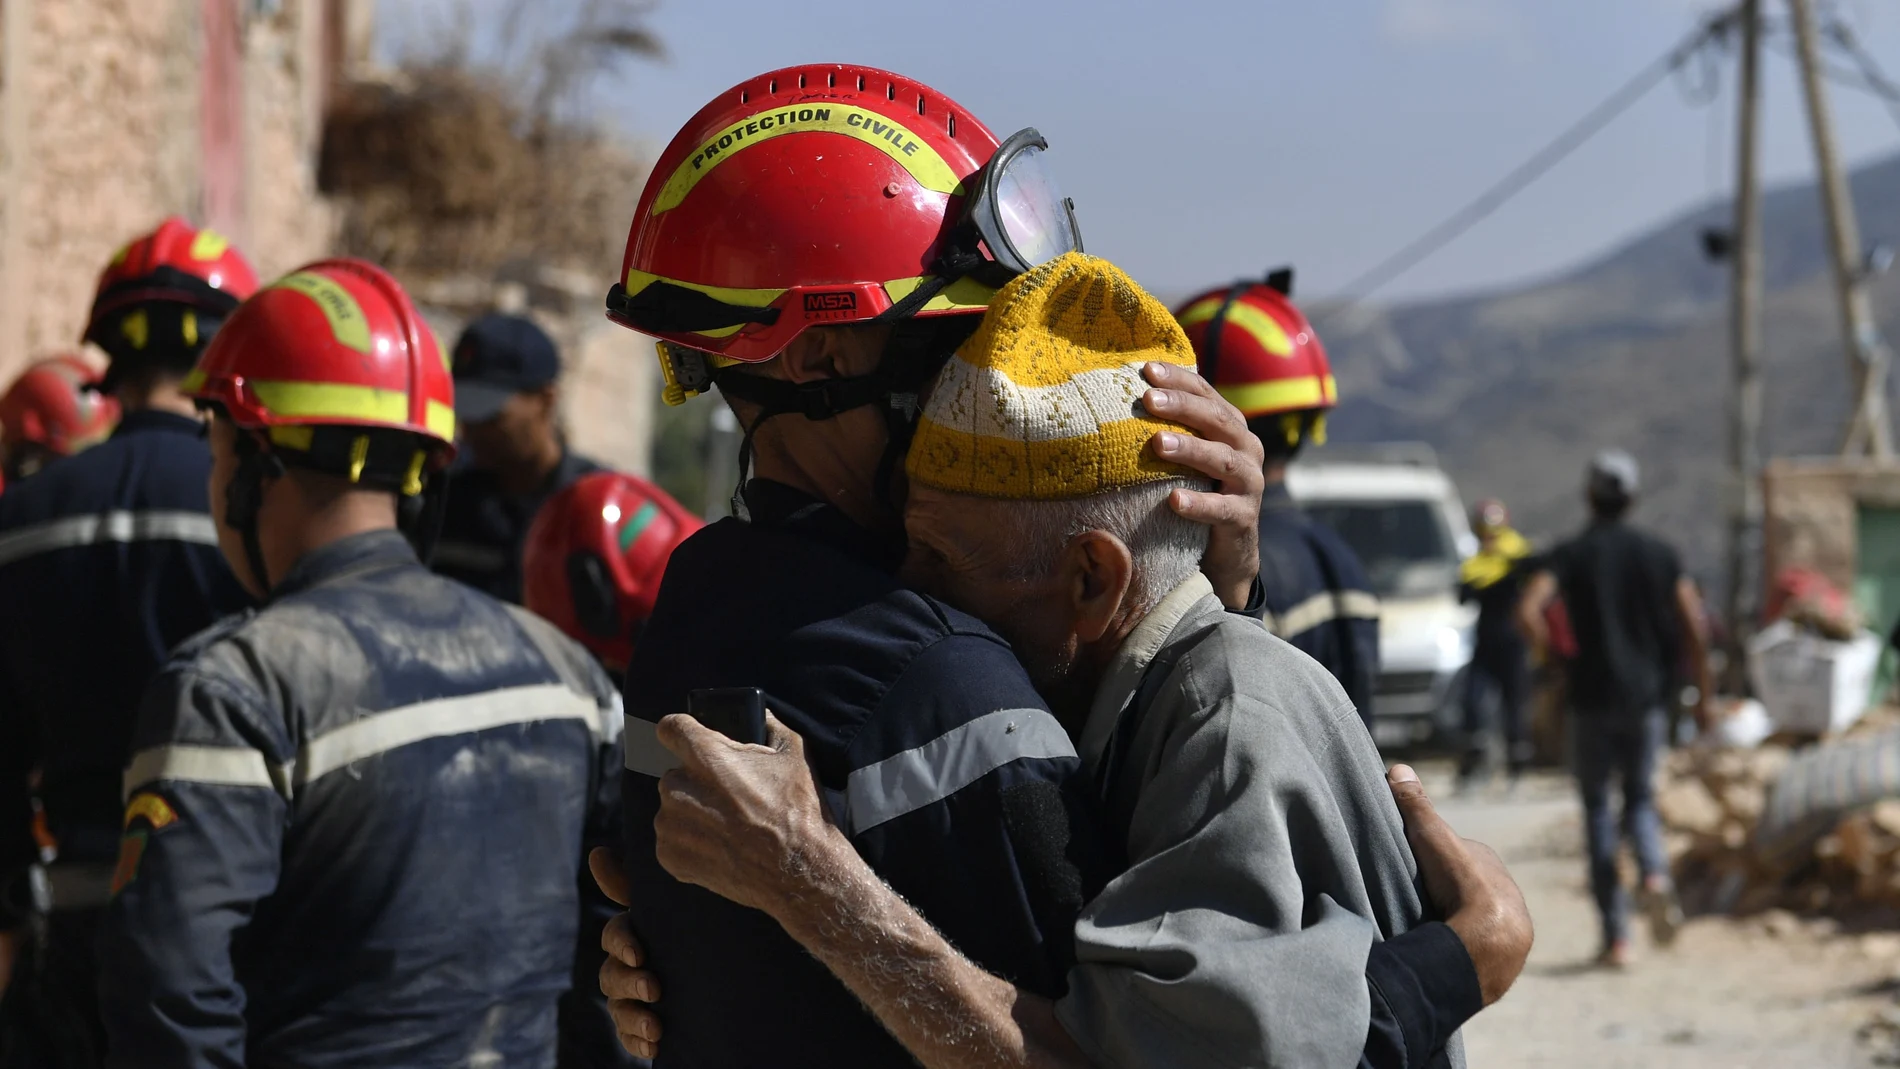 A man hugs a member of the civil protection team as they prepare to recover bodies of victims from a collapsed building, Imi Ntala, Amizmiz, south of Marrakesh, Morocco